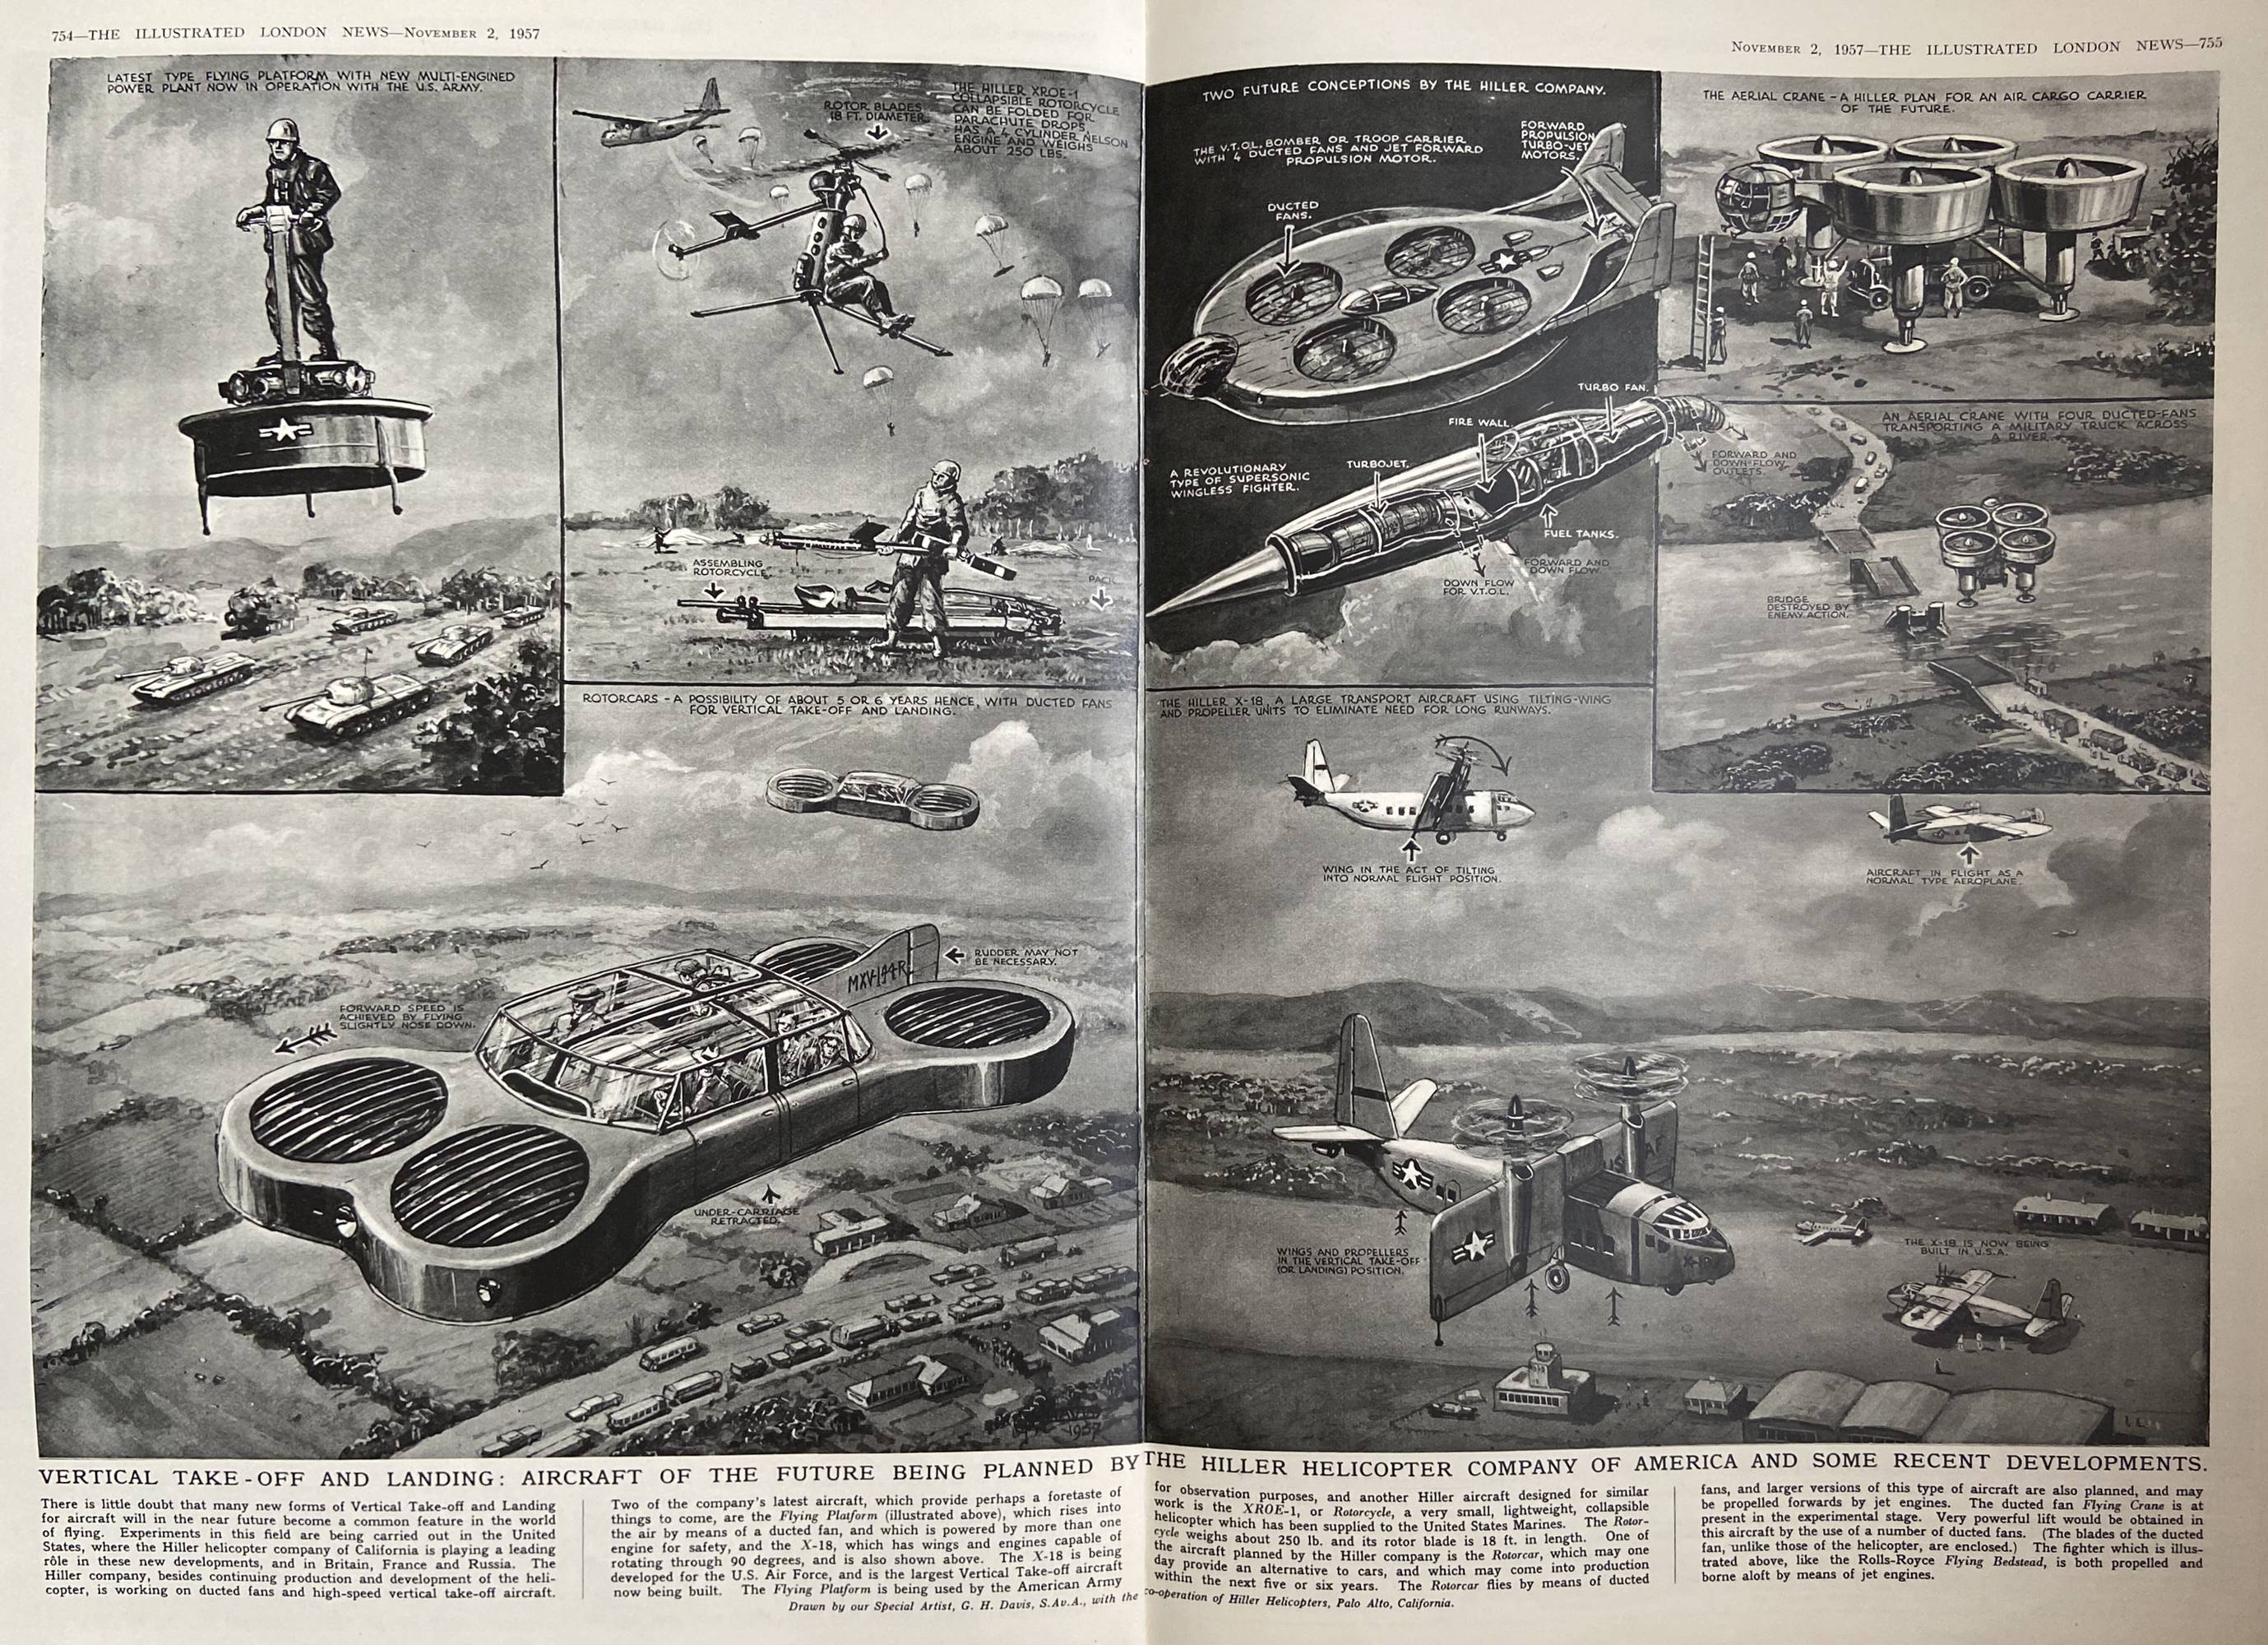 Aircraft of the Future Being Planned by the Hiller Helicopter Company of America - Illustrated London News 1957.jpg